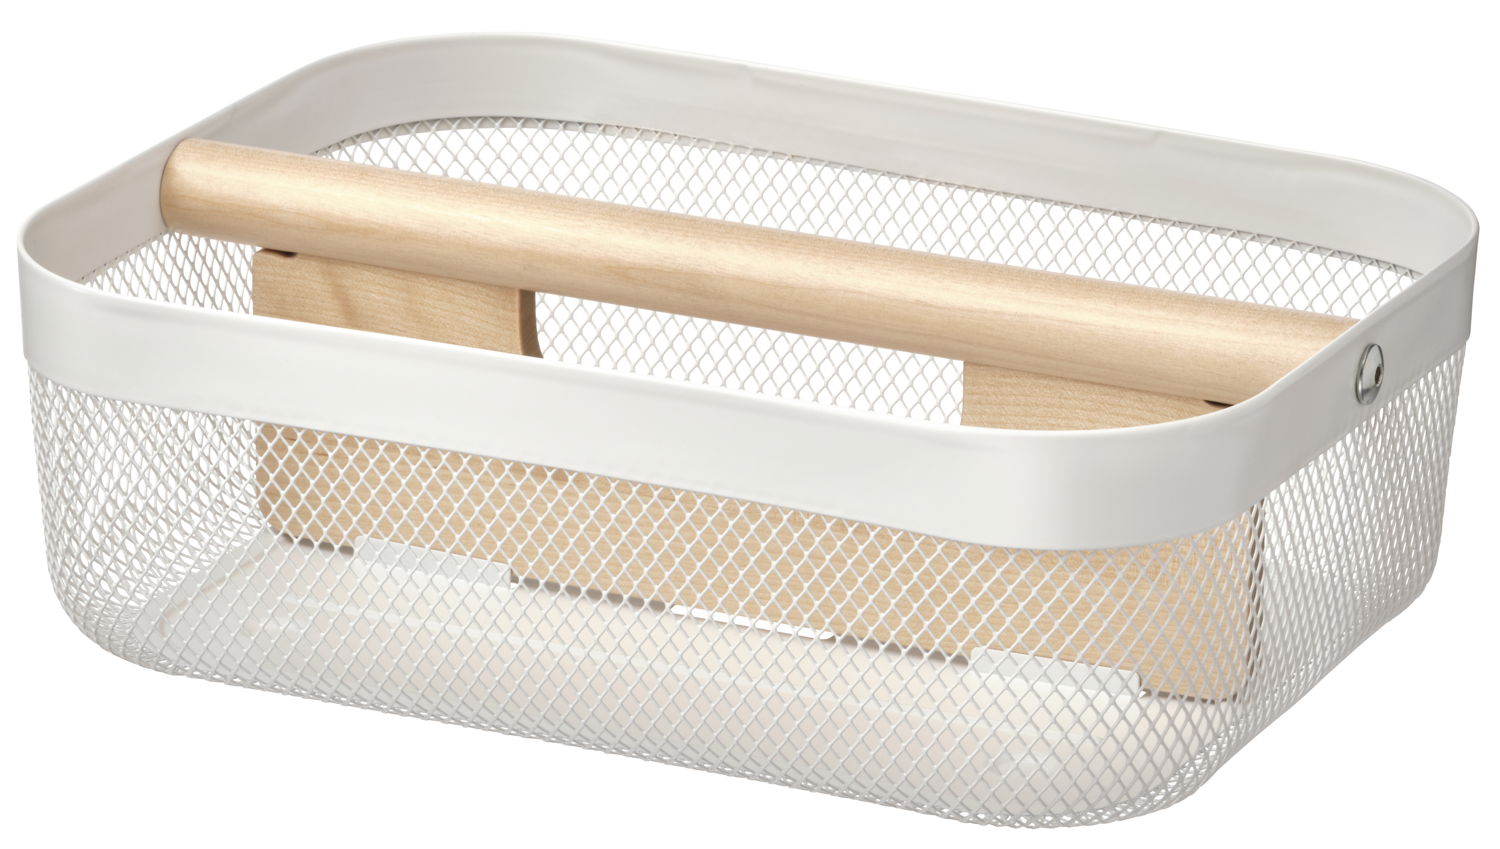 IKEA_January News FY23_RISATORP basket with compartments €9,99_PE884037